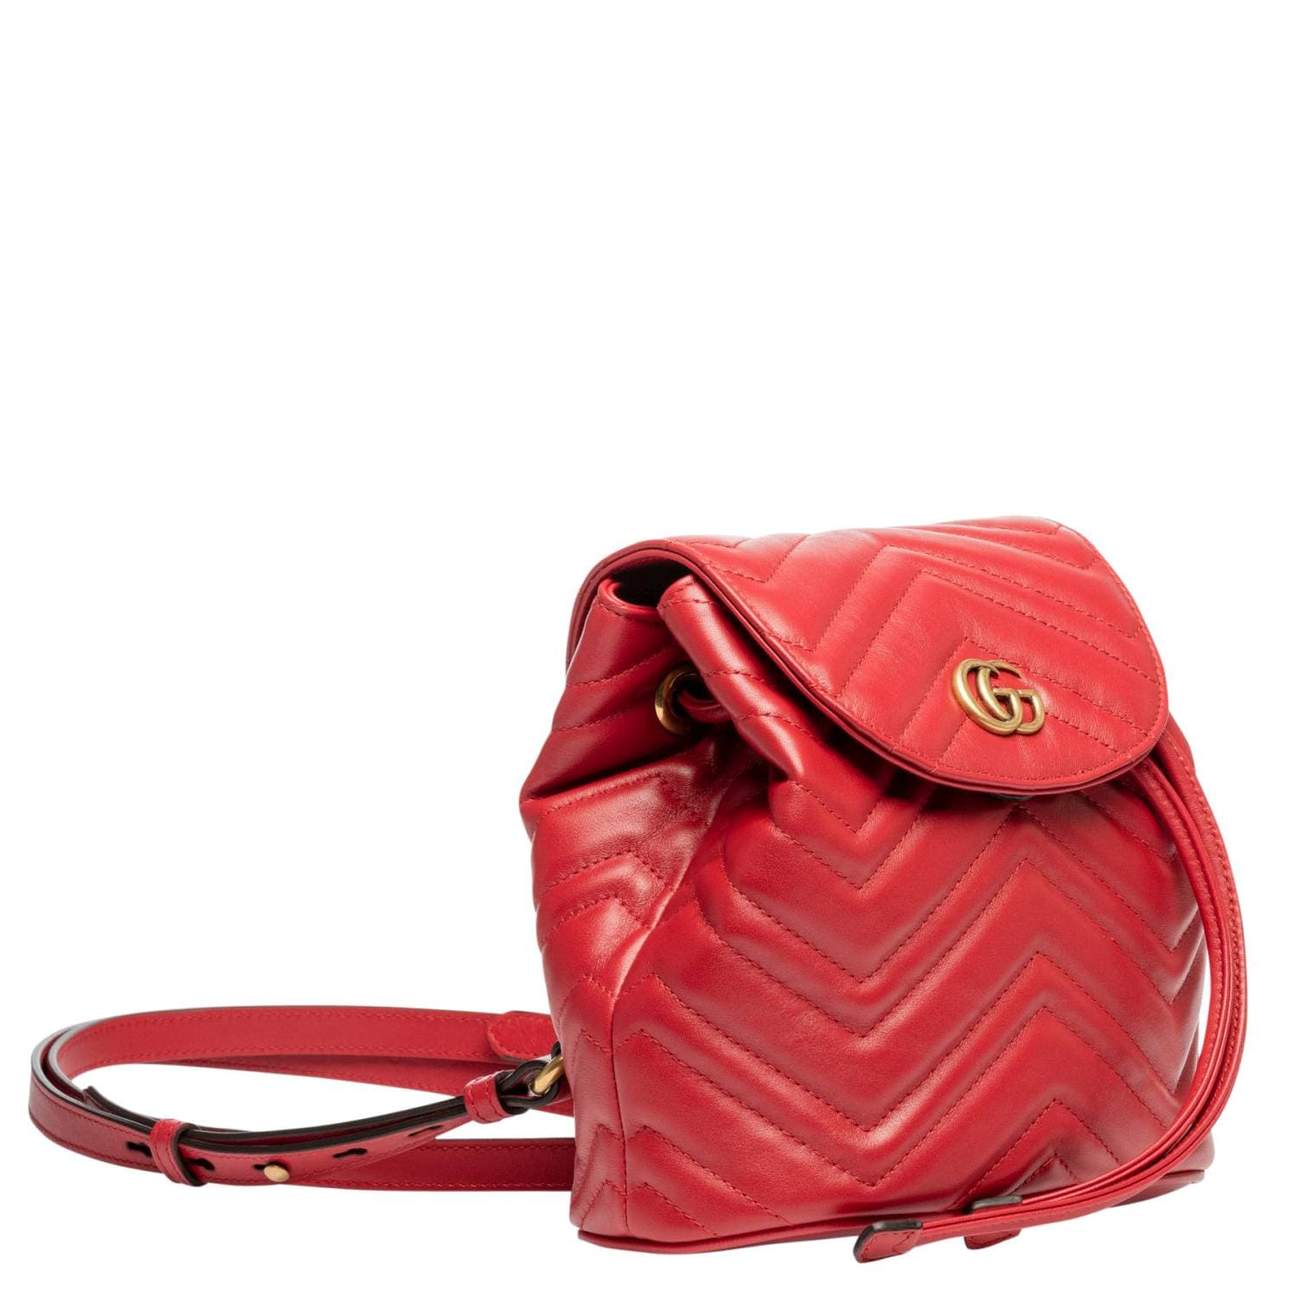 Gg running leather backpack Gucci Red in Leather - 25312291